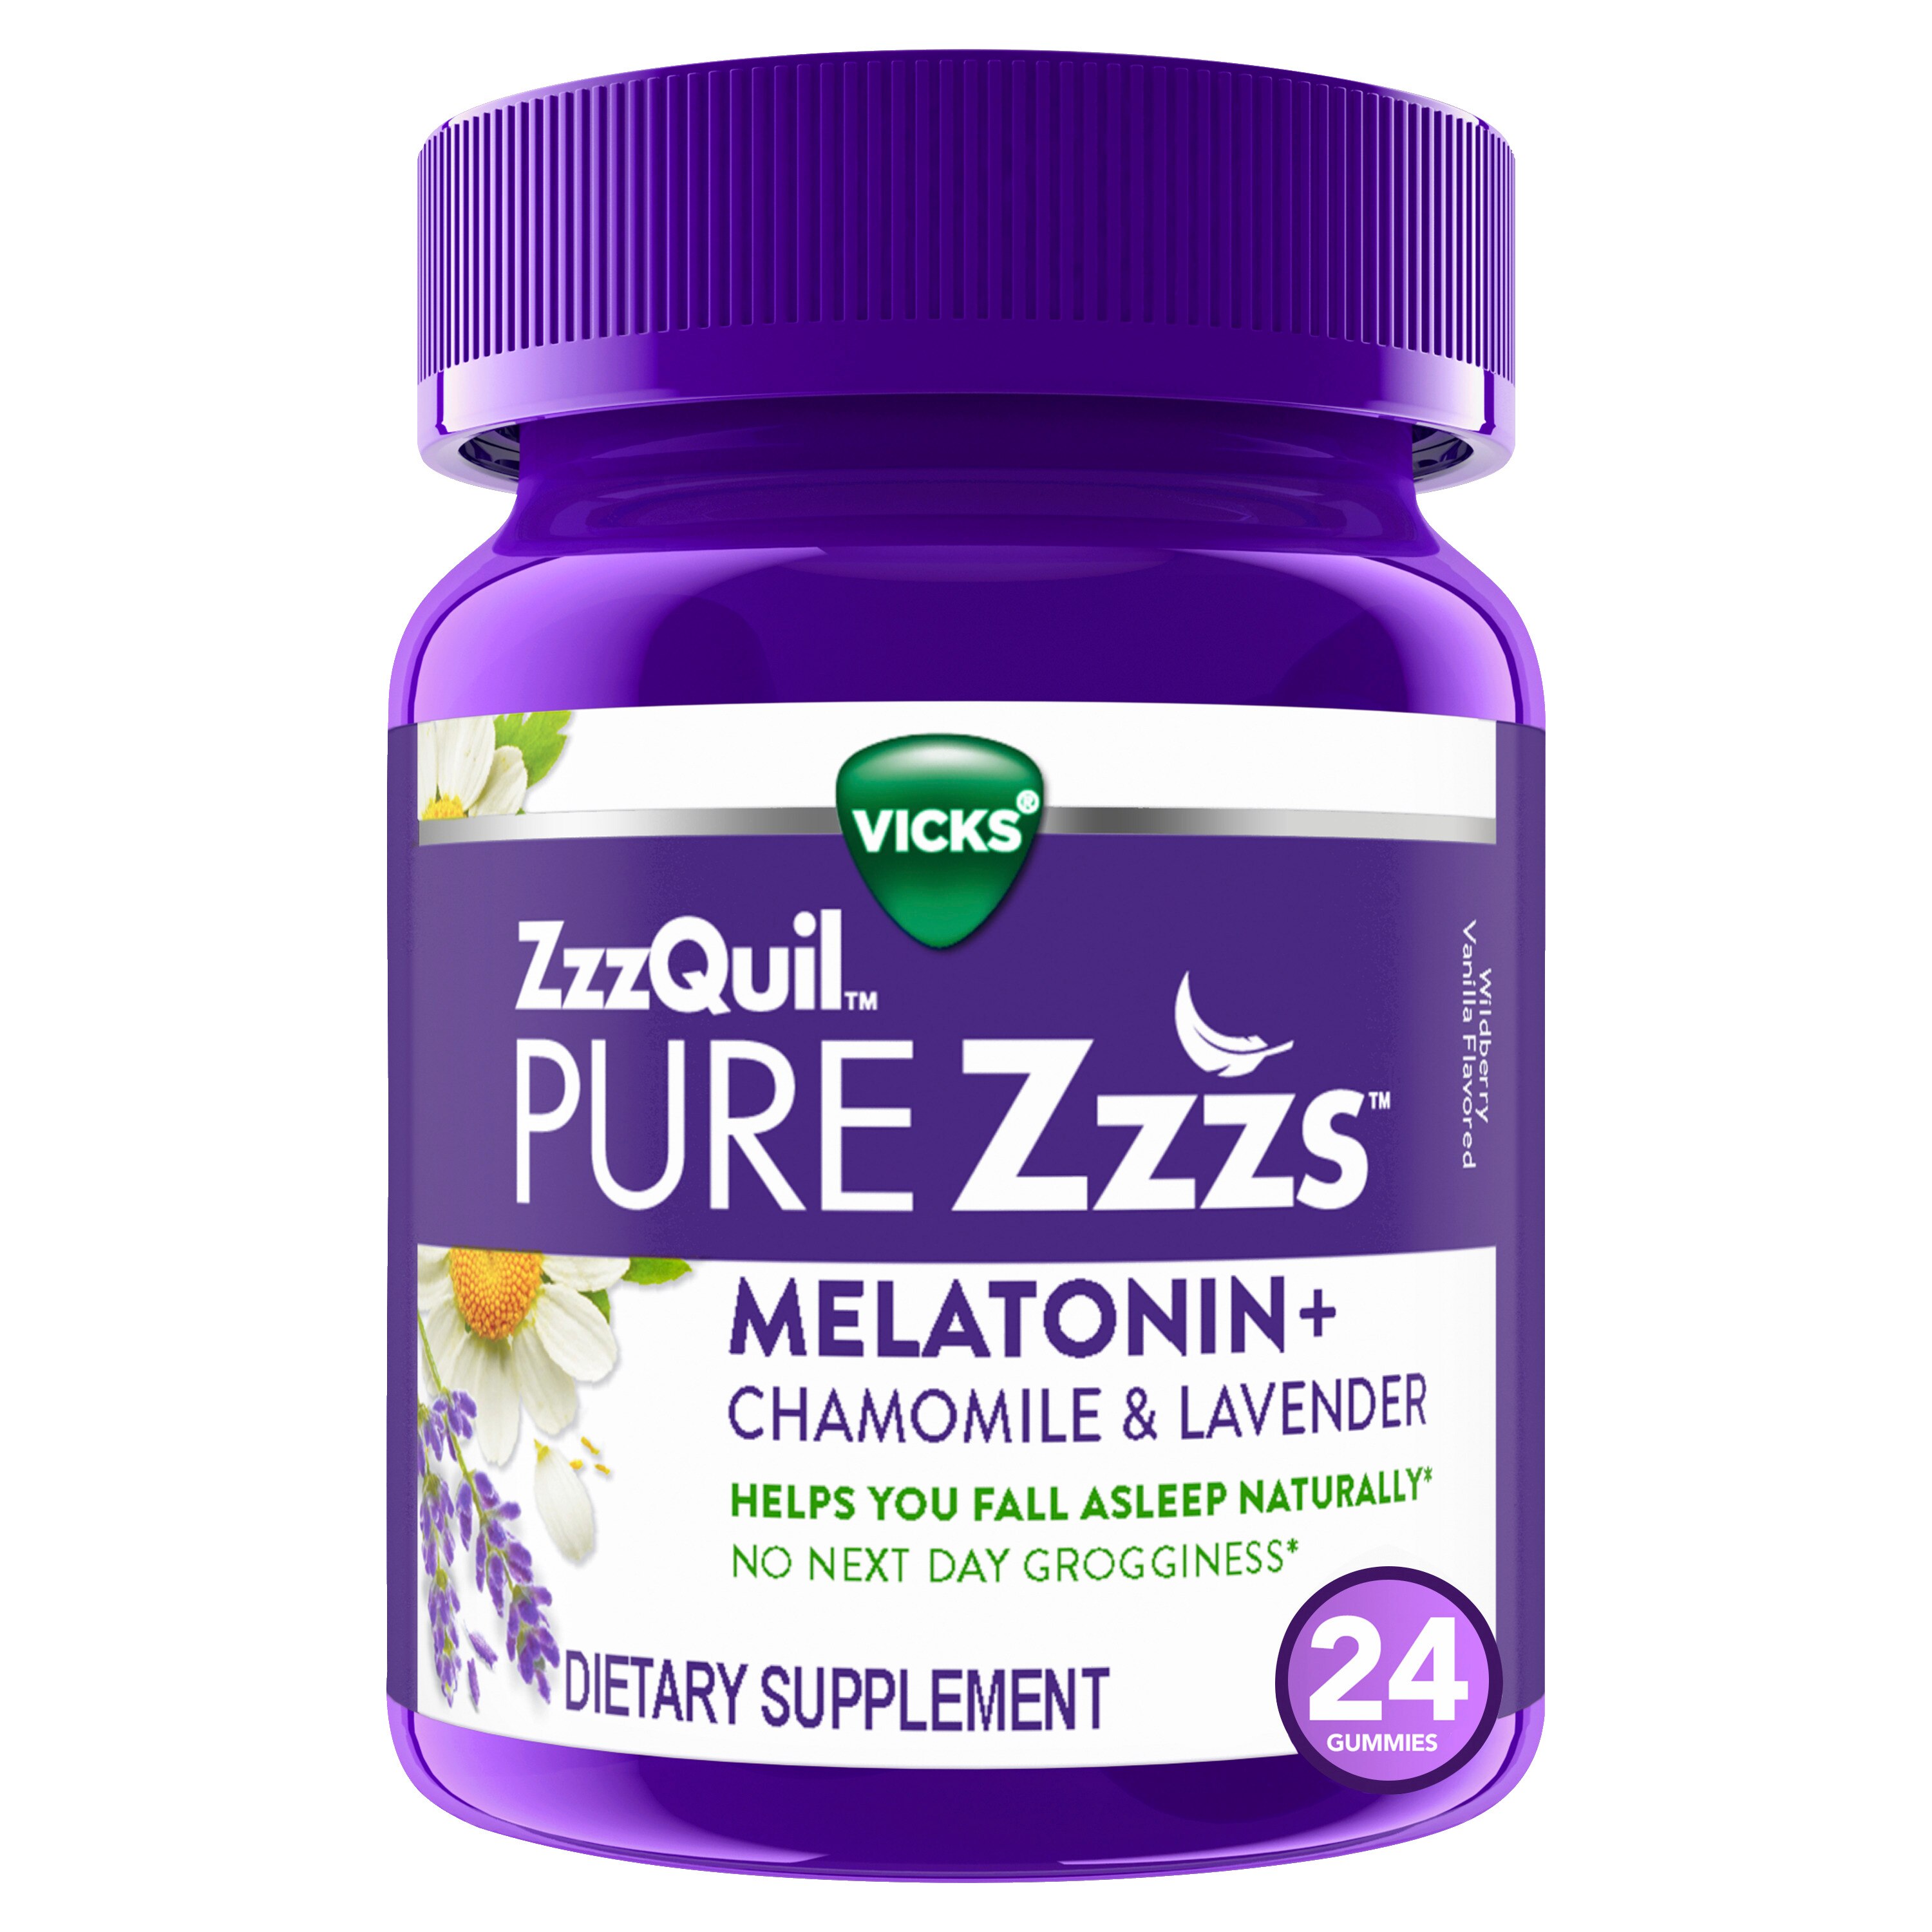 Can You Take Zzzquil While Pregnant Vicks Zzzquil Pure Zzzs Melatonin Natural Flavor Sleep Aid Gummies With Chamomile Lavender Valerian Root